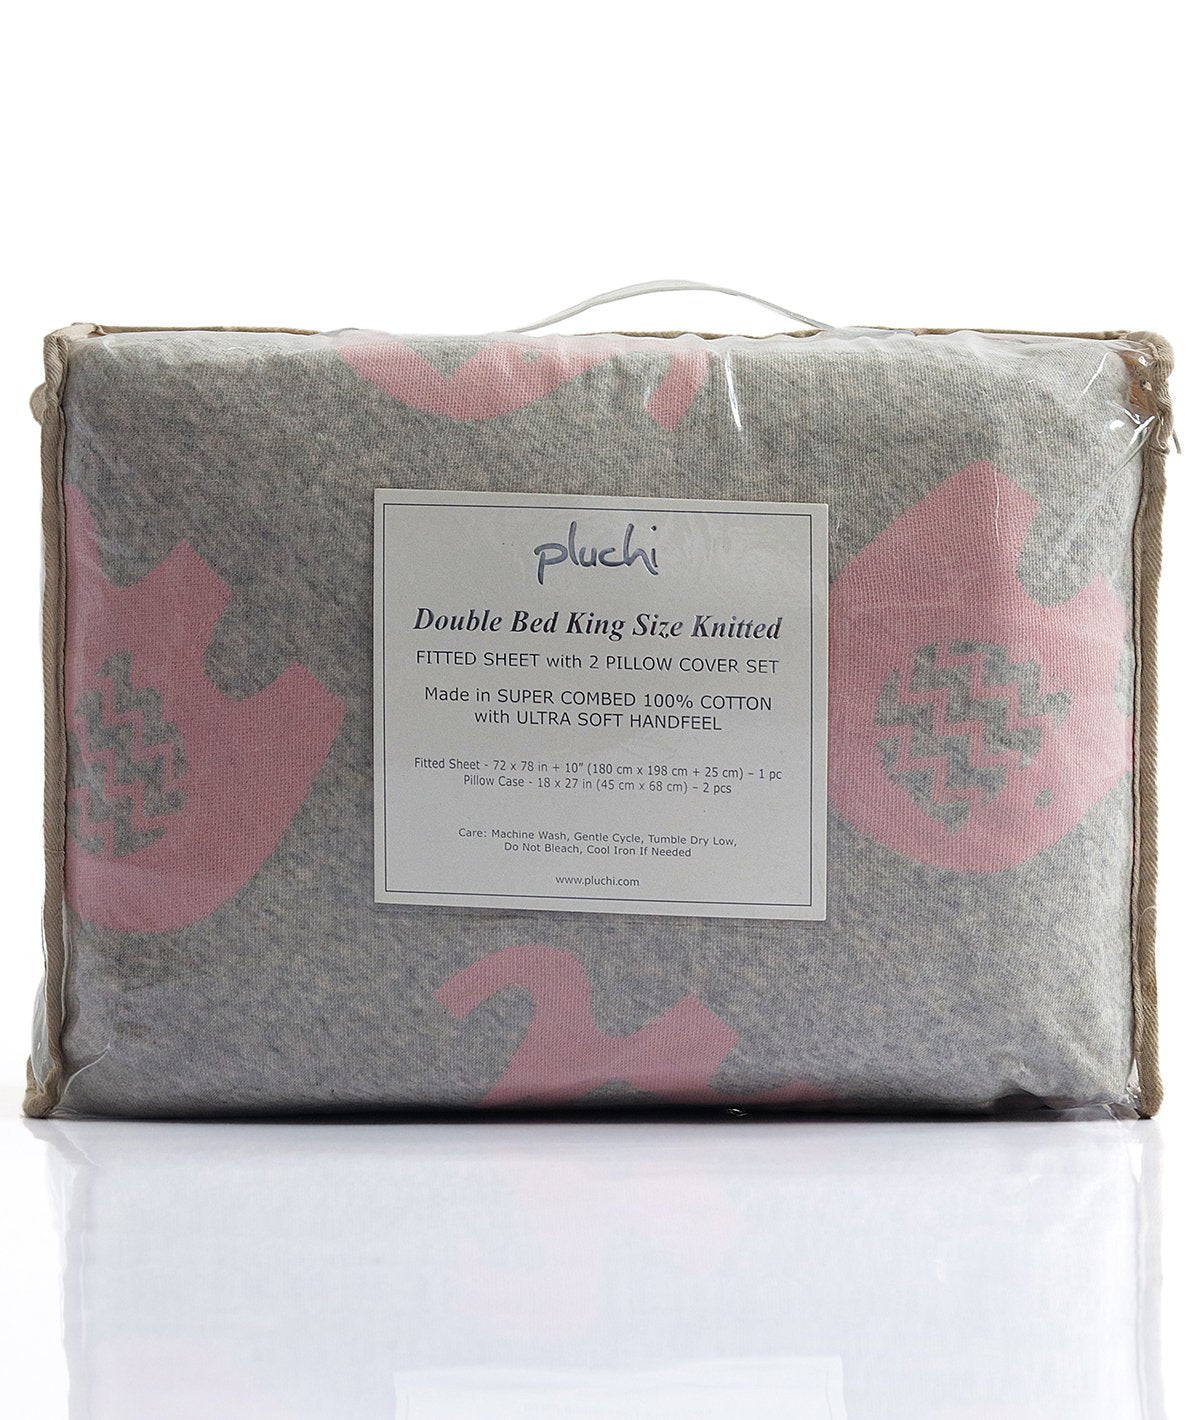 Elephant - Vanilla Grey Cotton Knitted King Size Double Bed Fitted Sheet with 2 Pillow Covers Set